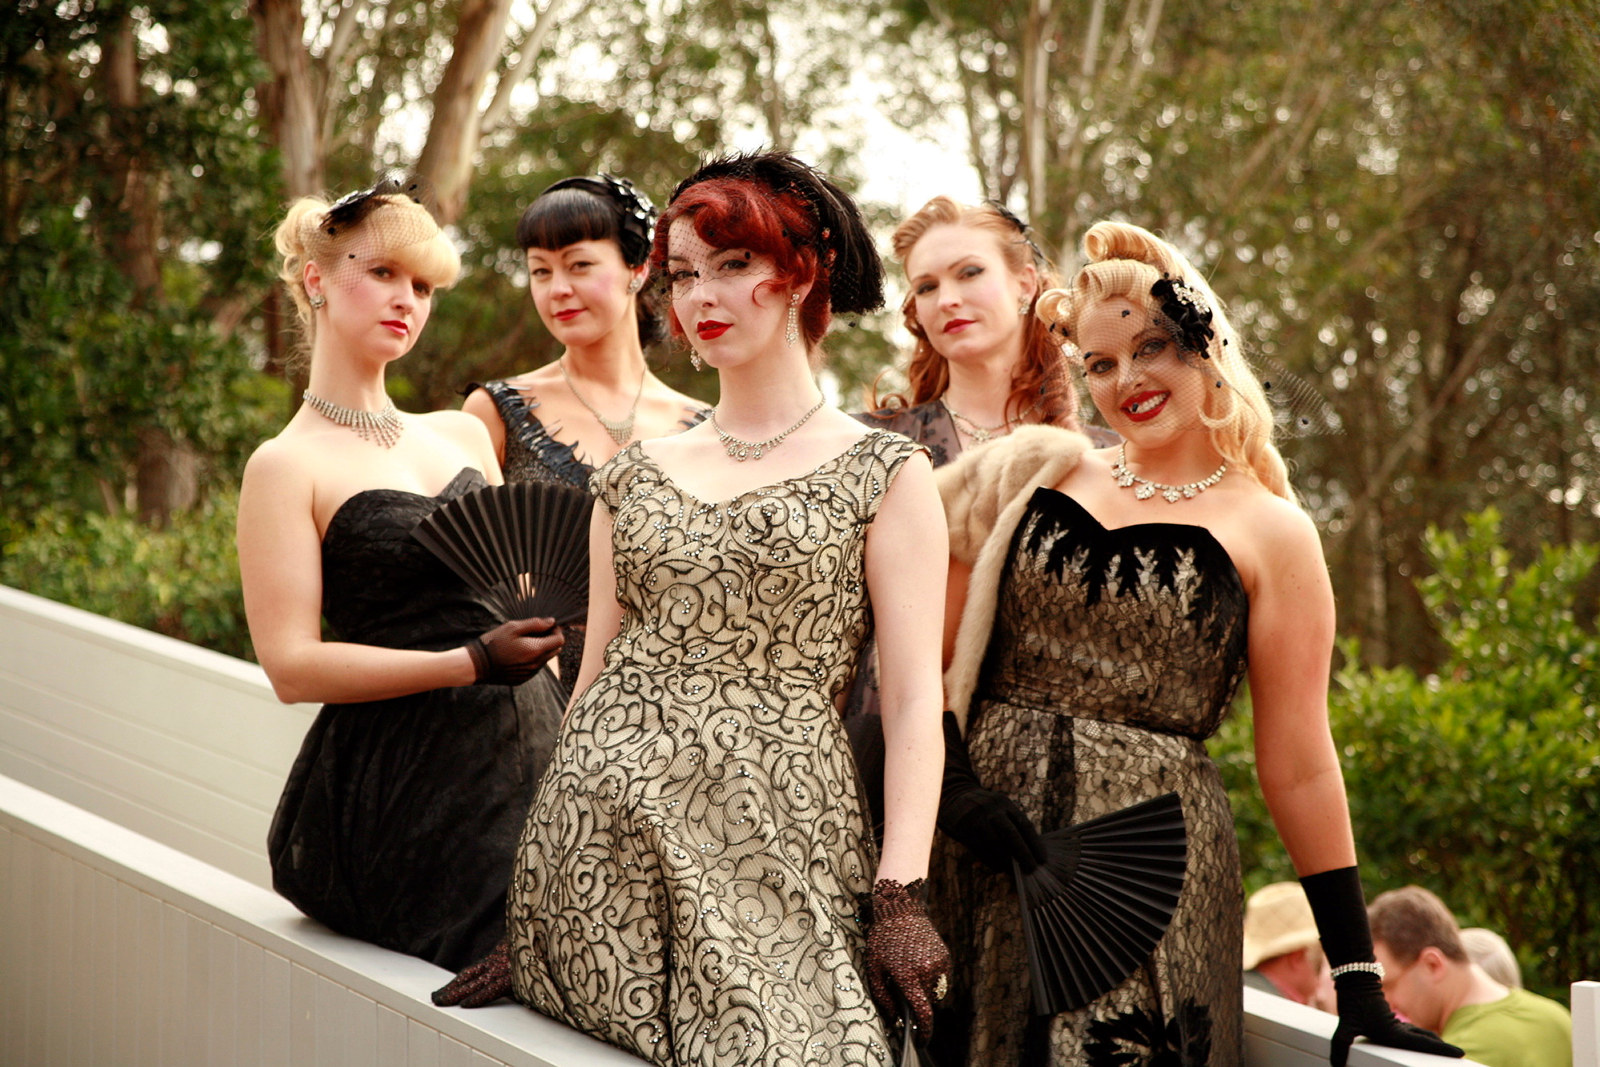 Dressed up in vintage frocks for the Fifties Fair